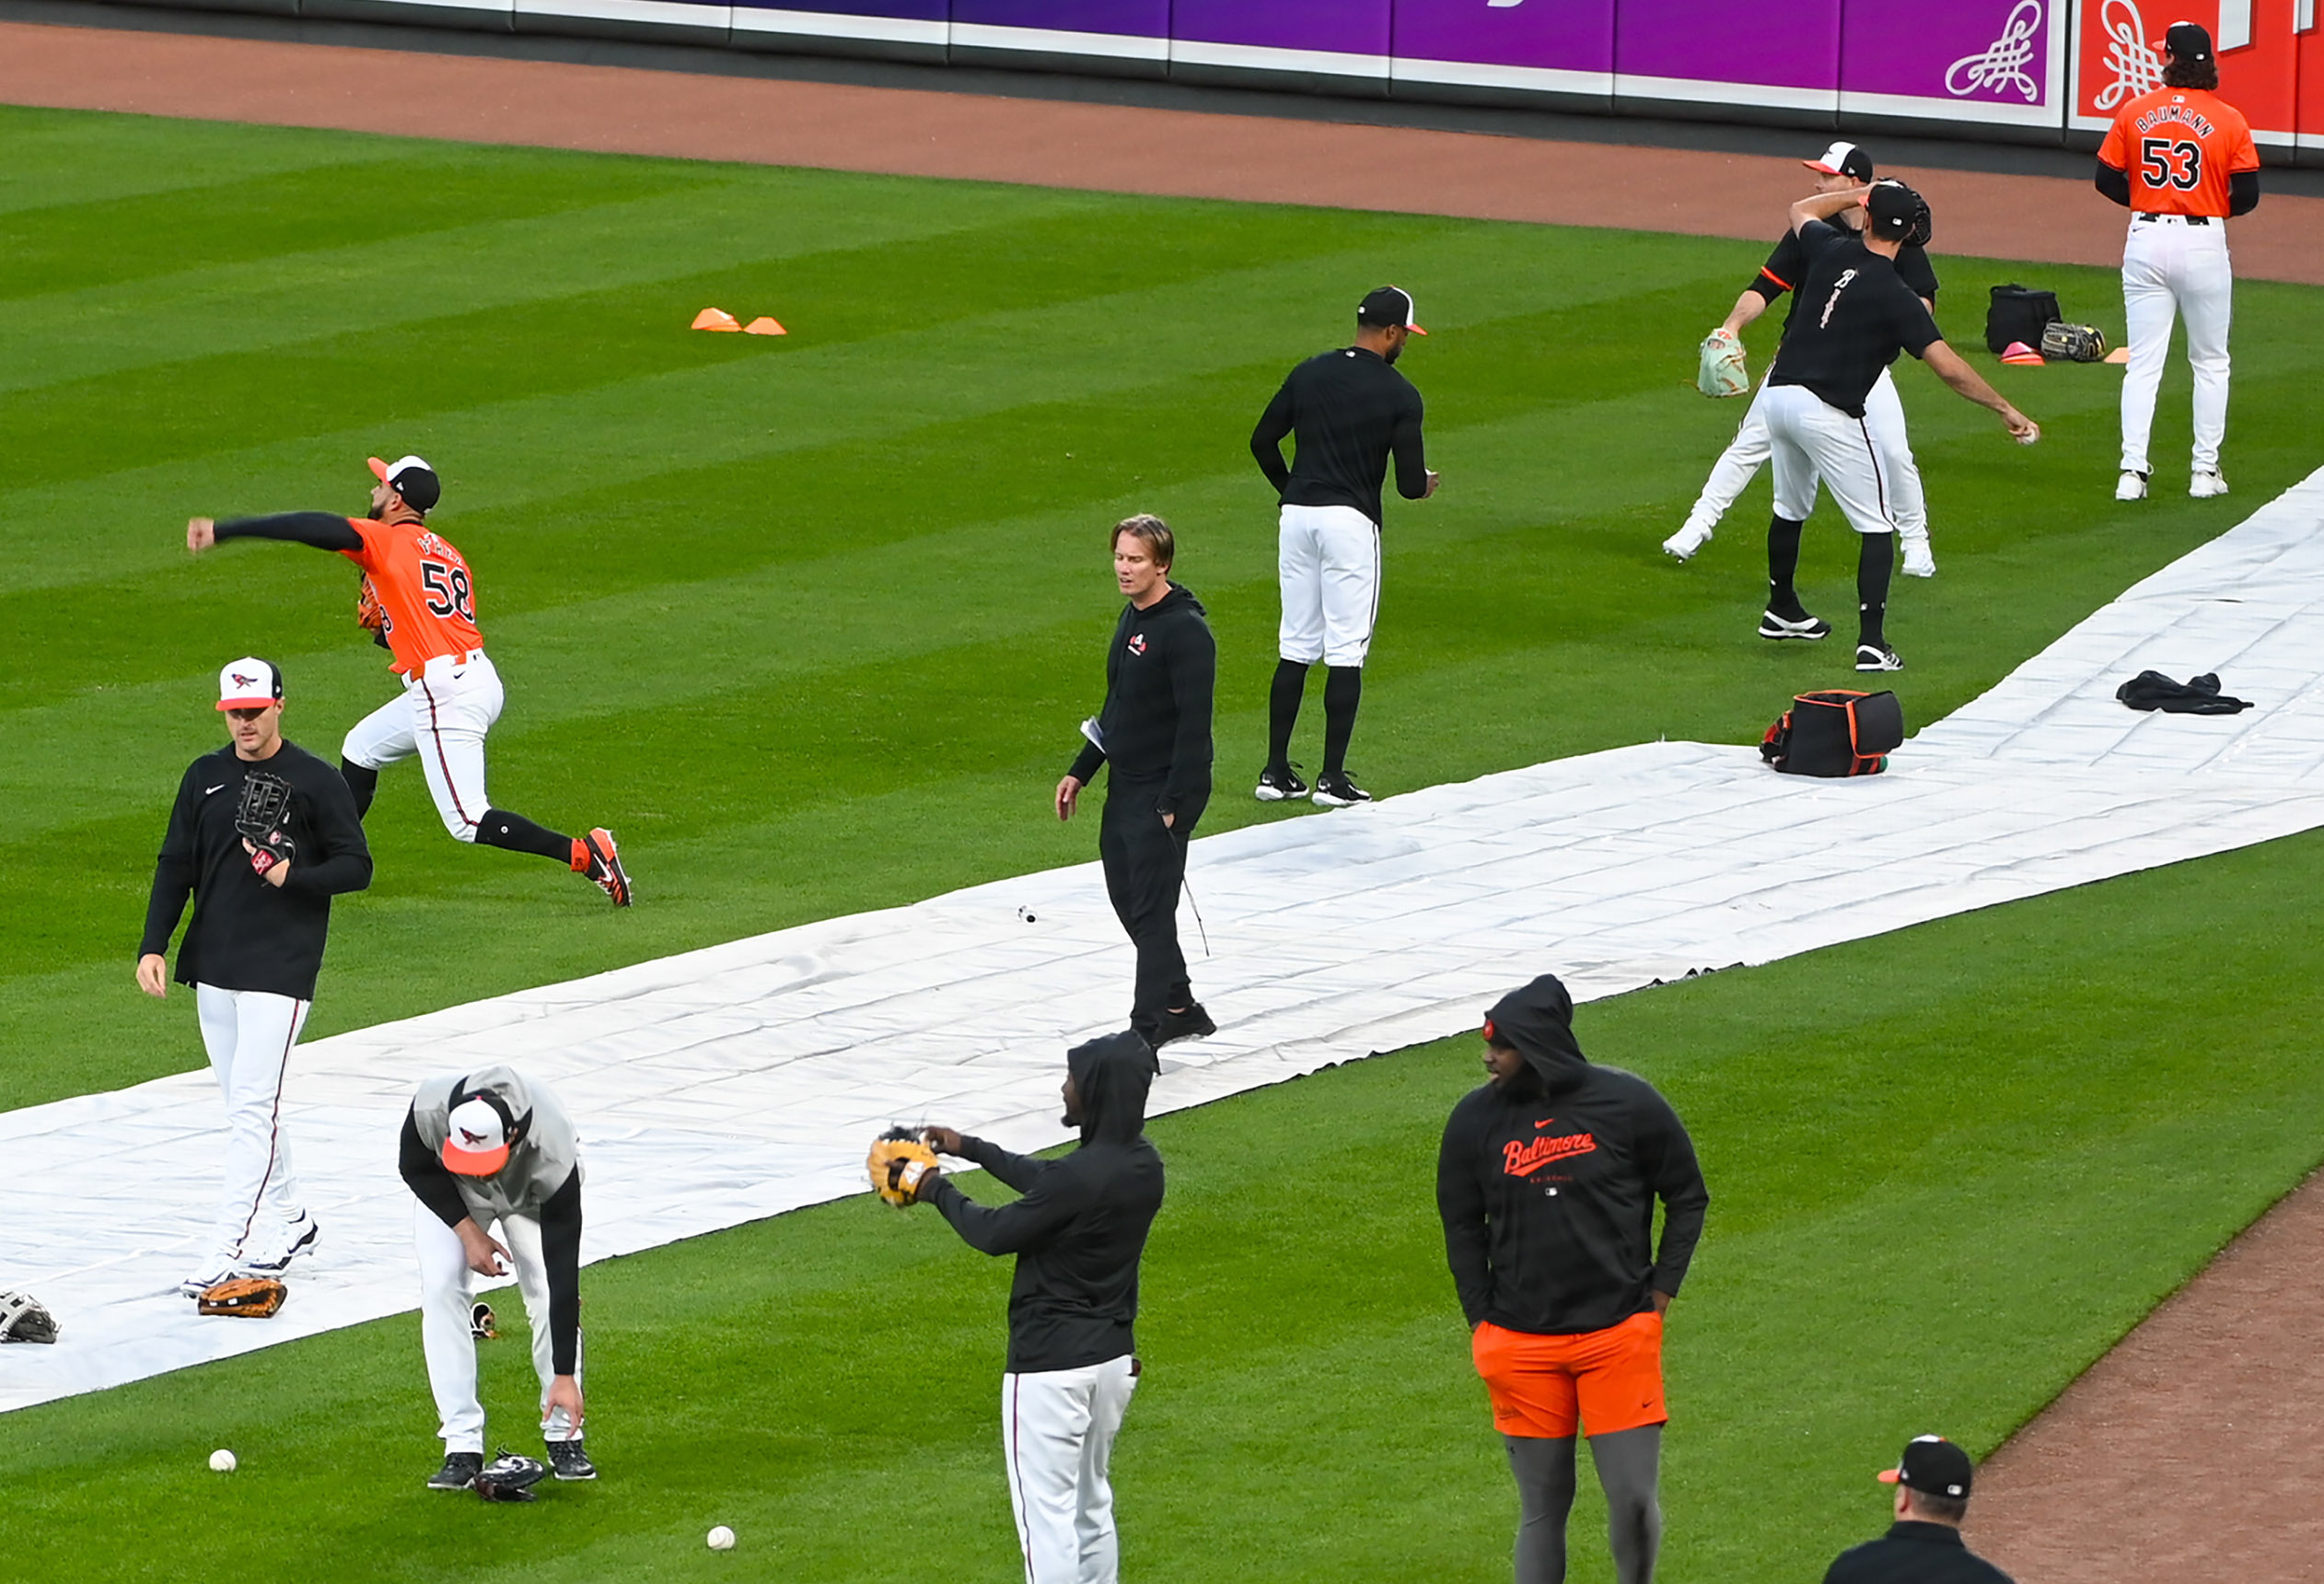 Mar. 26, 2024: Orioles held a workout at Camden Yards before their 2024 Opening Day game on Thursday against the Los Angeles Angels at Orioles Park. Orioles pitchers workout in the outfield during the practice. (Kevin Richardson/Staff)